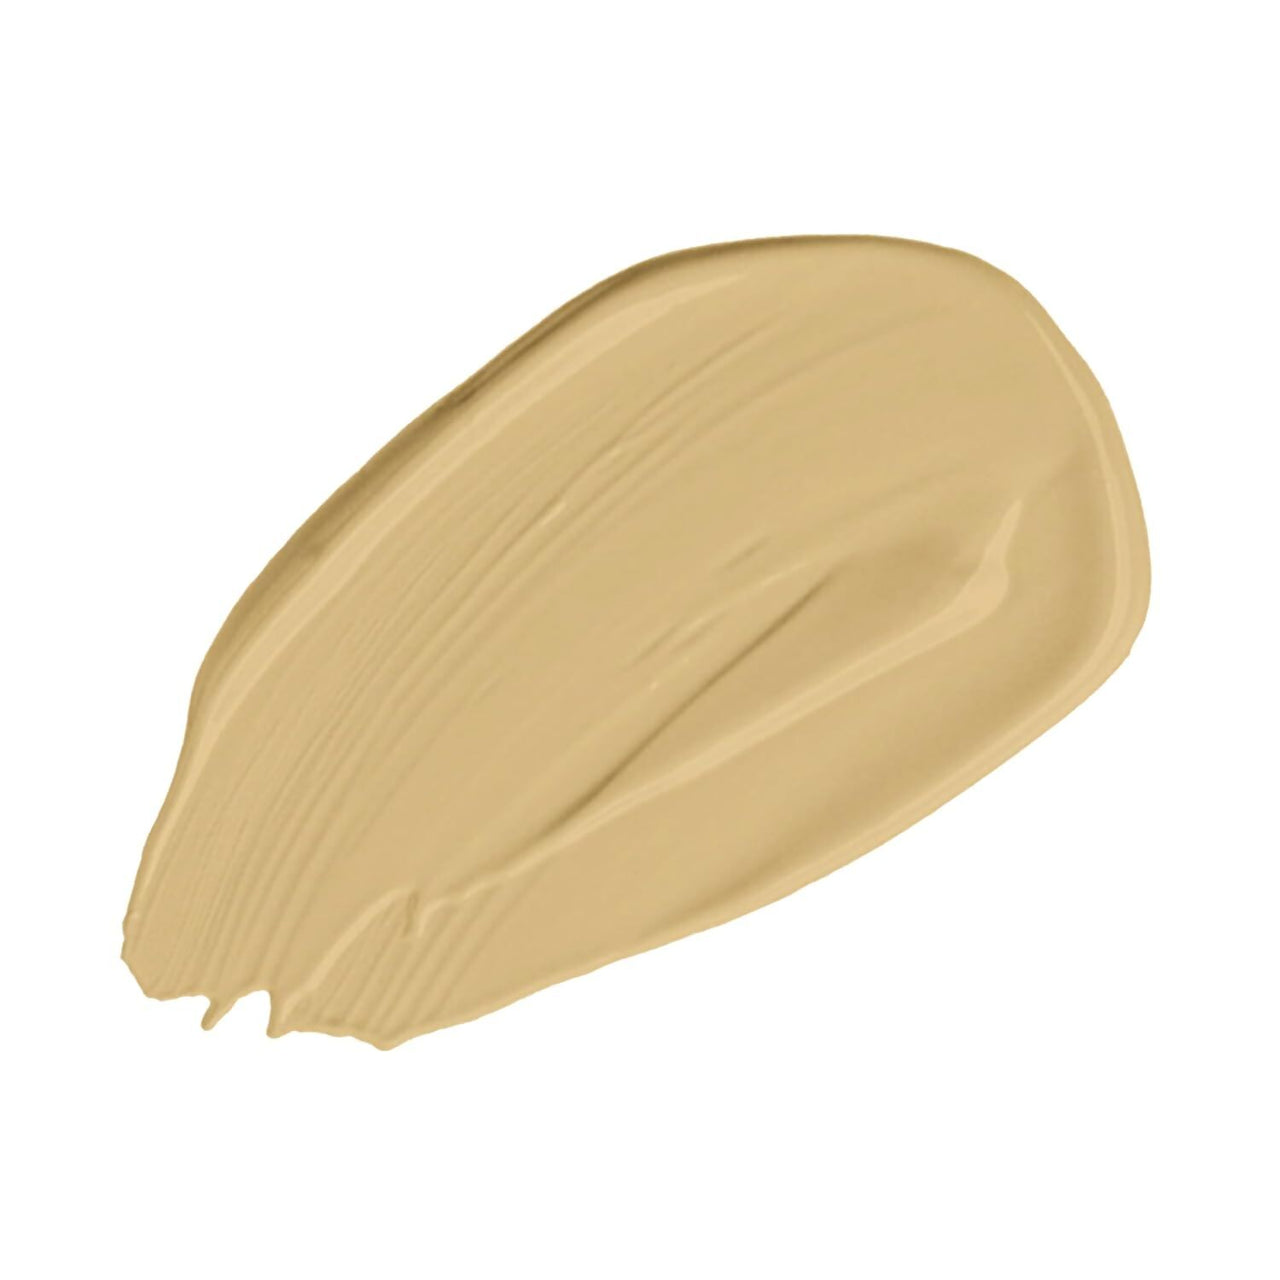 Colors Queen Flawless Foundation – 05 Classic Ivory - Distacart